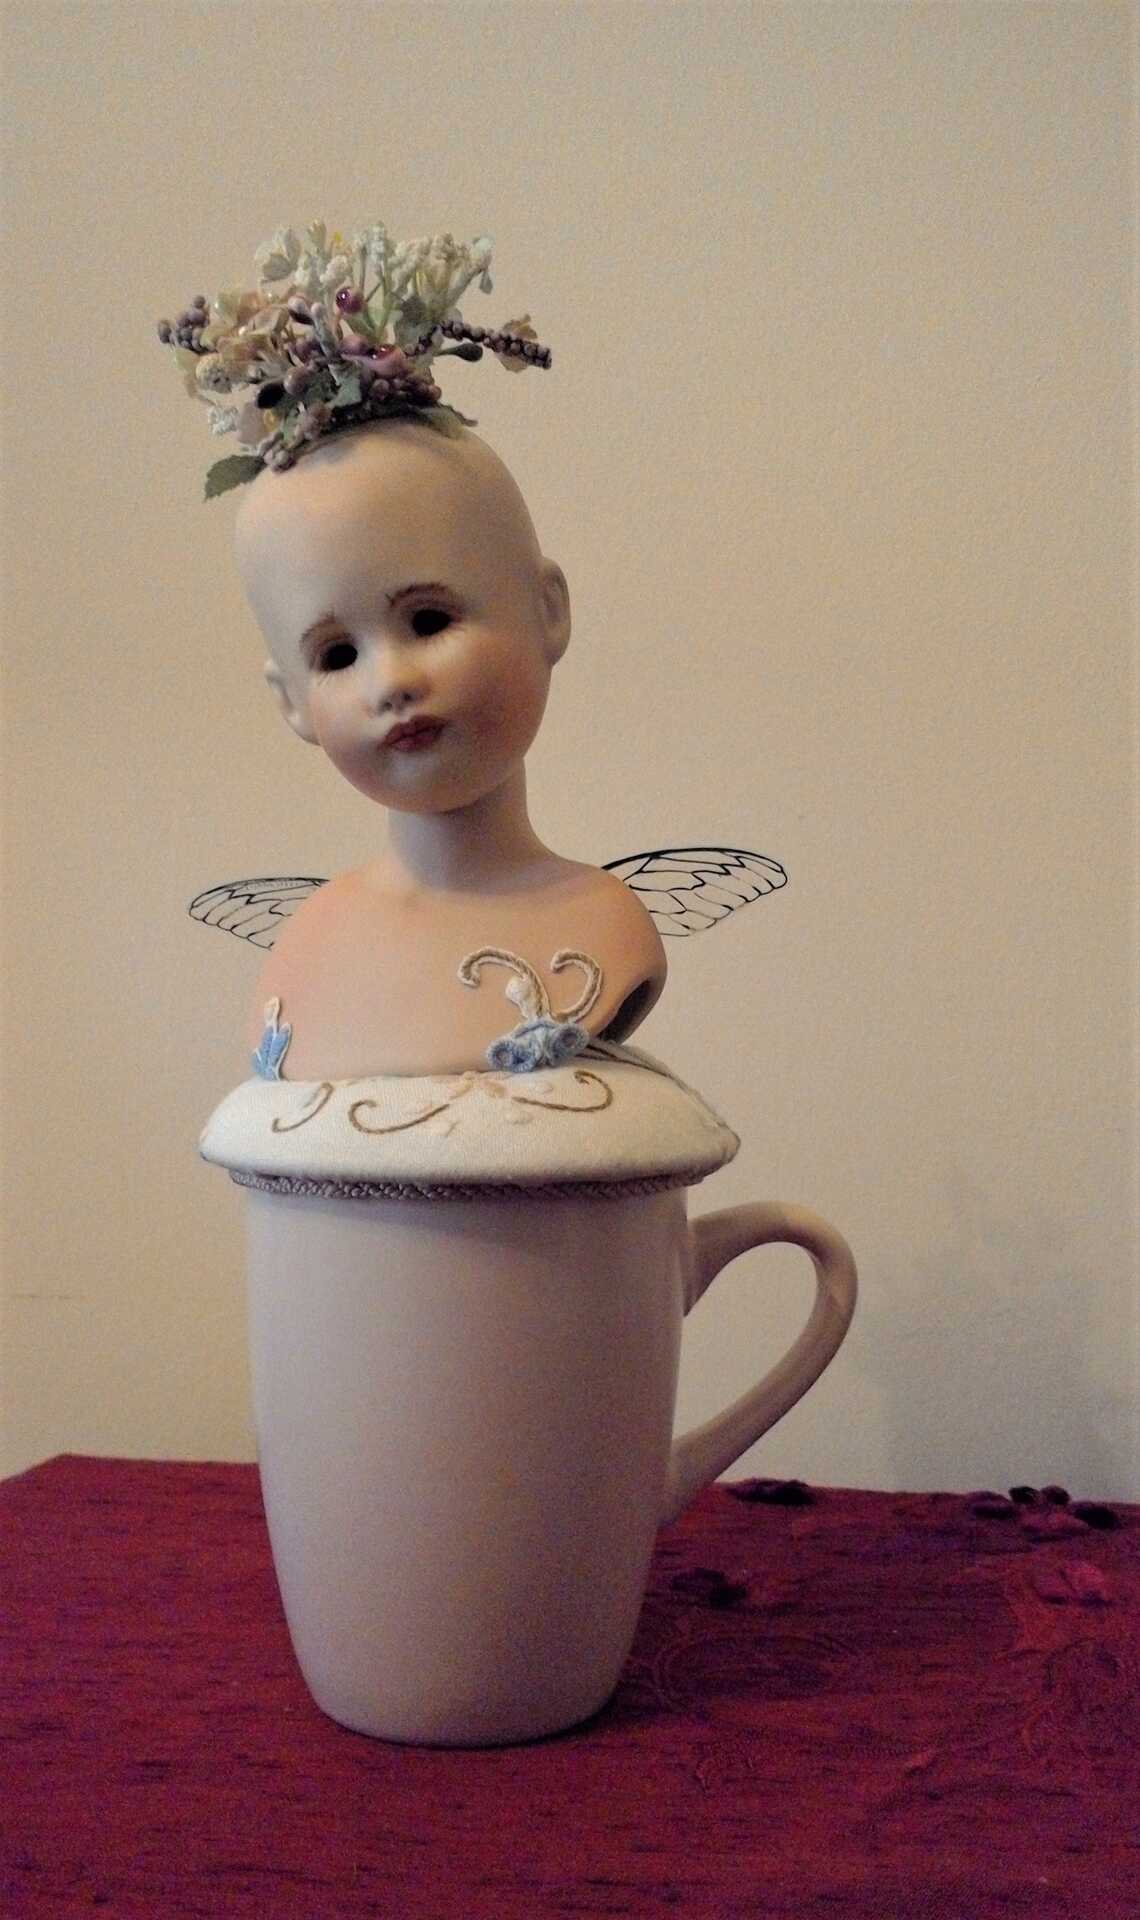 Sculpture "Finding the Way Back II" by Libby Bloxham. The head and shoulders of a porcelain doll are posed atop a rose pink drinking mug, on a round white fabric cushion with an embroidered flower pattern. The doll has no hair affixed, but a cluster of flowers sprout from her crown. Her head is tilted to one side with a wistful expression, and acetate insect wings droop slightly at her back.